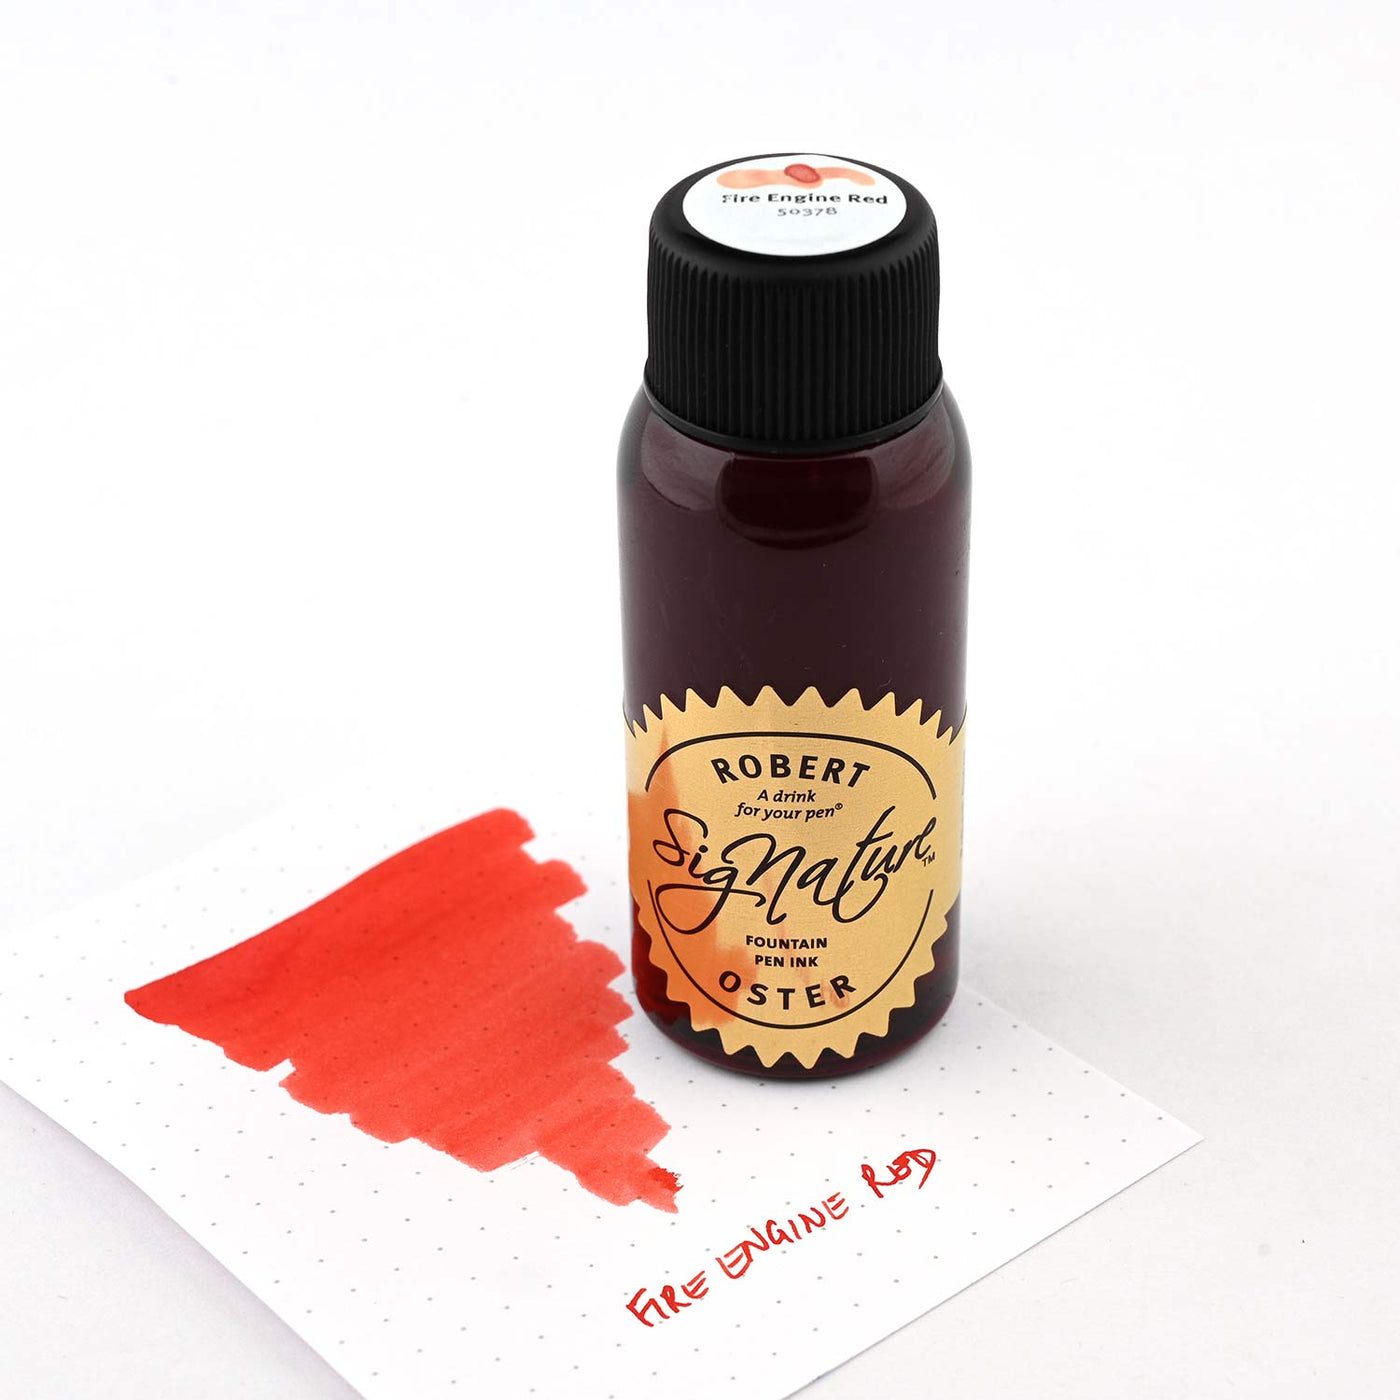 Robert Oster Signature Ink Fire Engine Red - 50ml 3